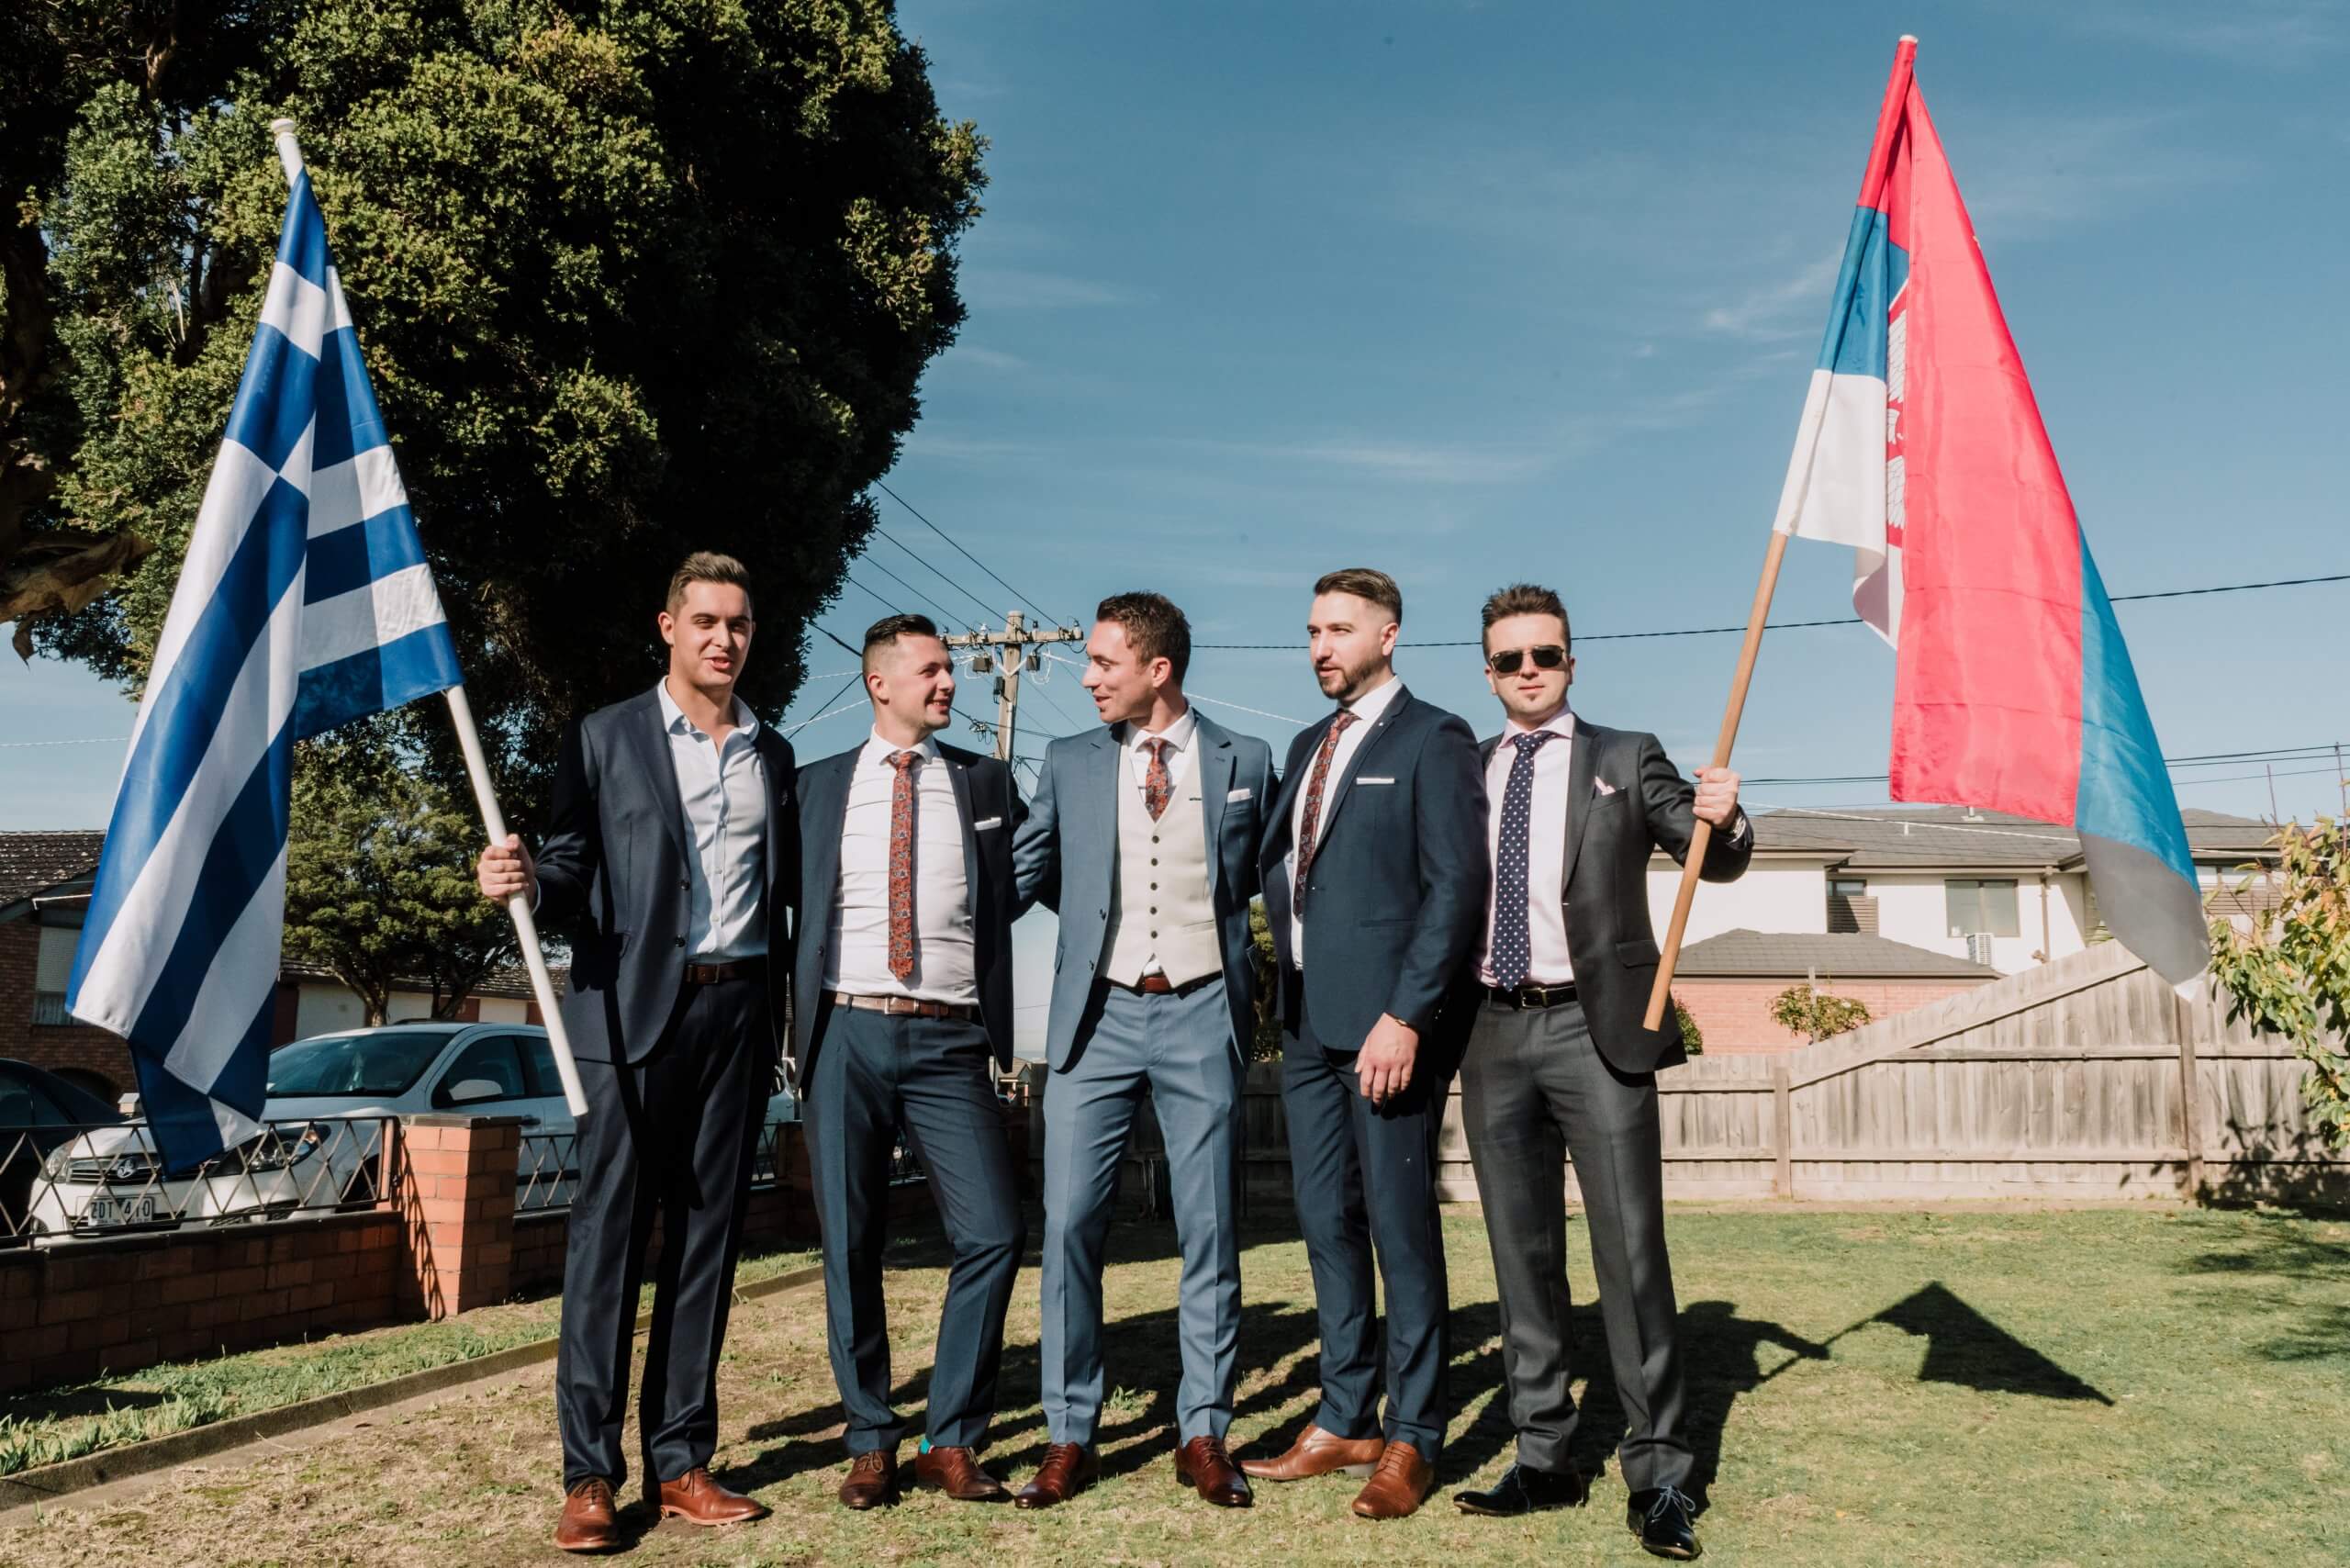 Customise Your Wedding - The groom stands between four groomsmen. The two groomsmen on both ends each holding the Flags of Greece and Serbia.